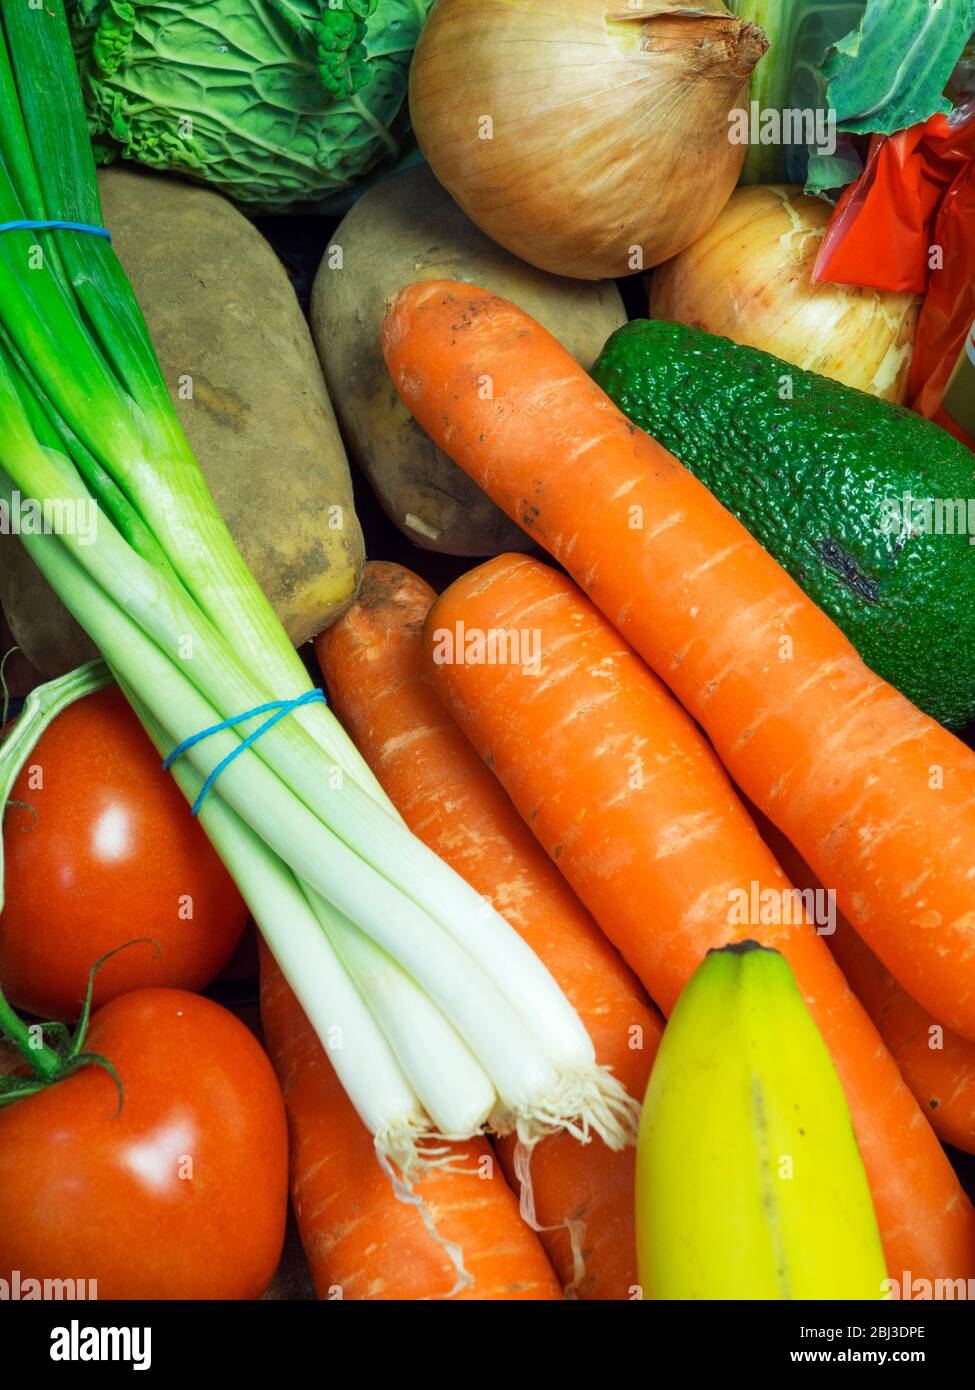 A Box Of Organic Vegetables Veg Box Ready For Home Delivery On The Stock Photo Alamy